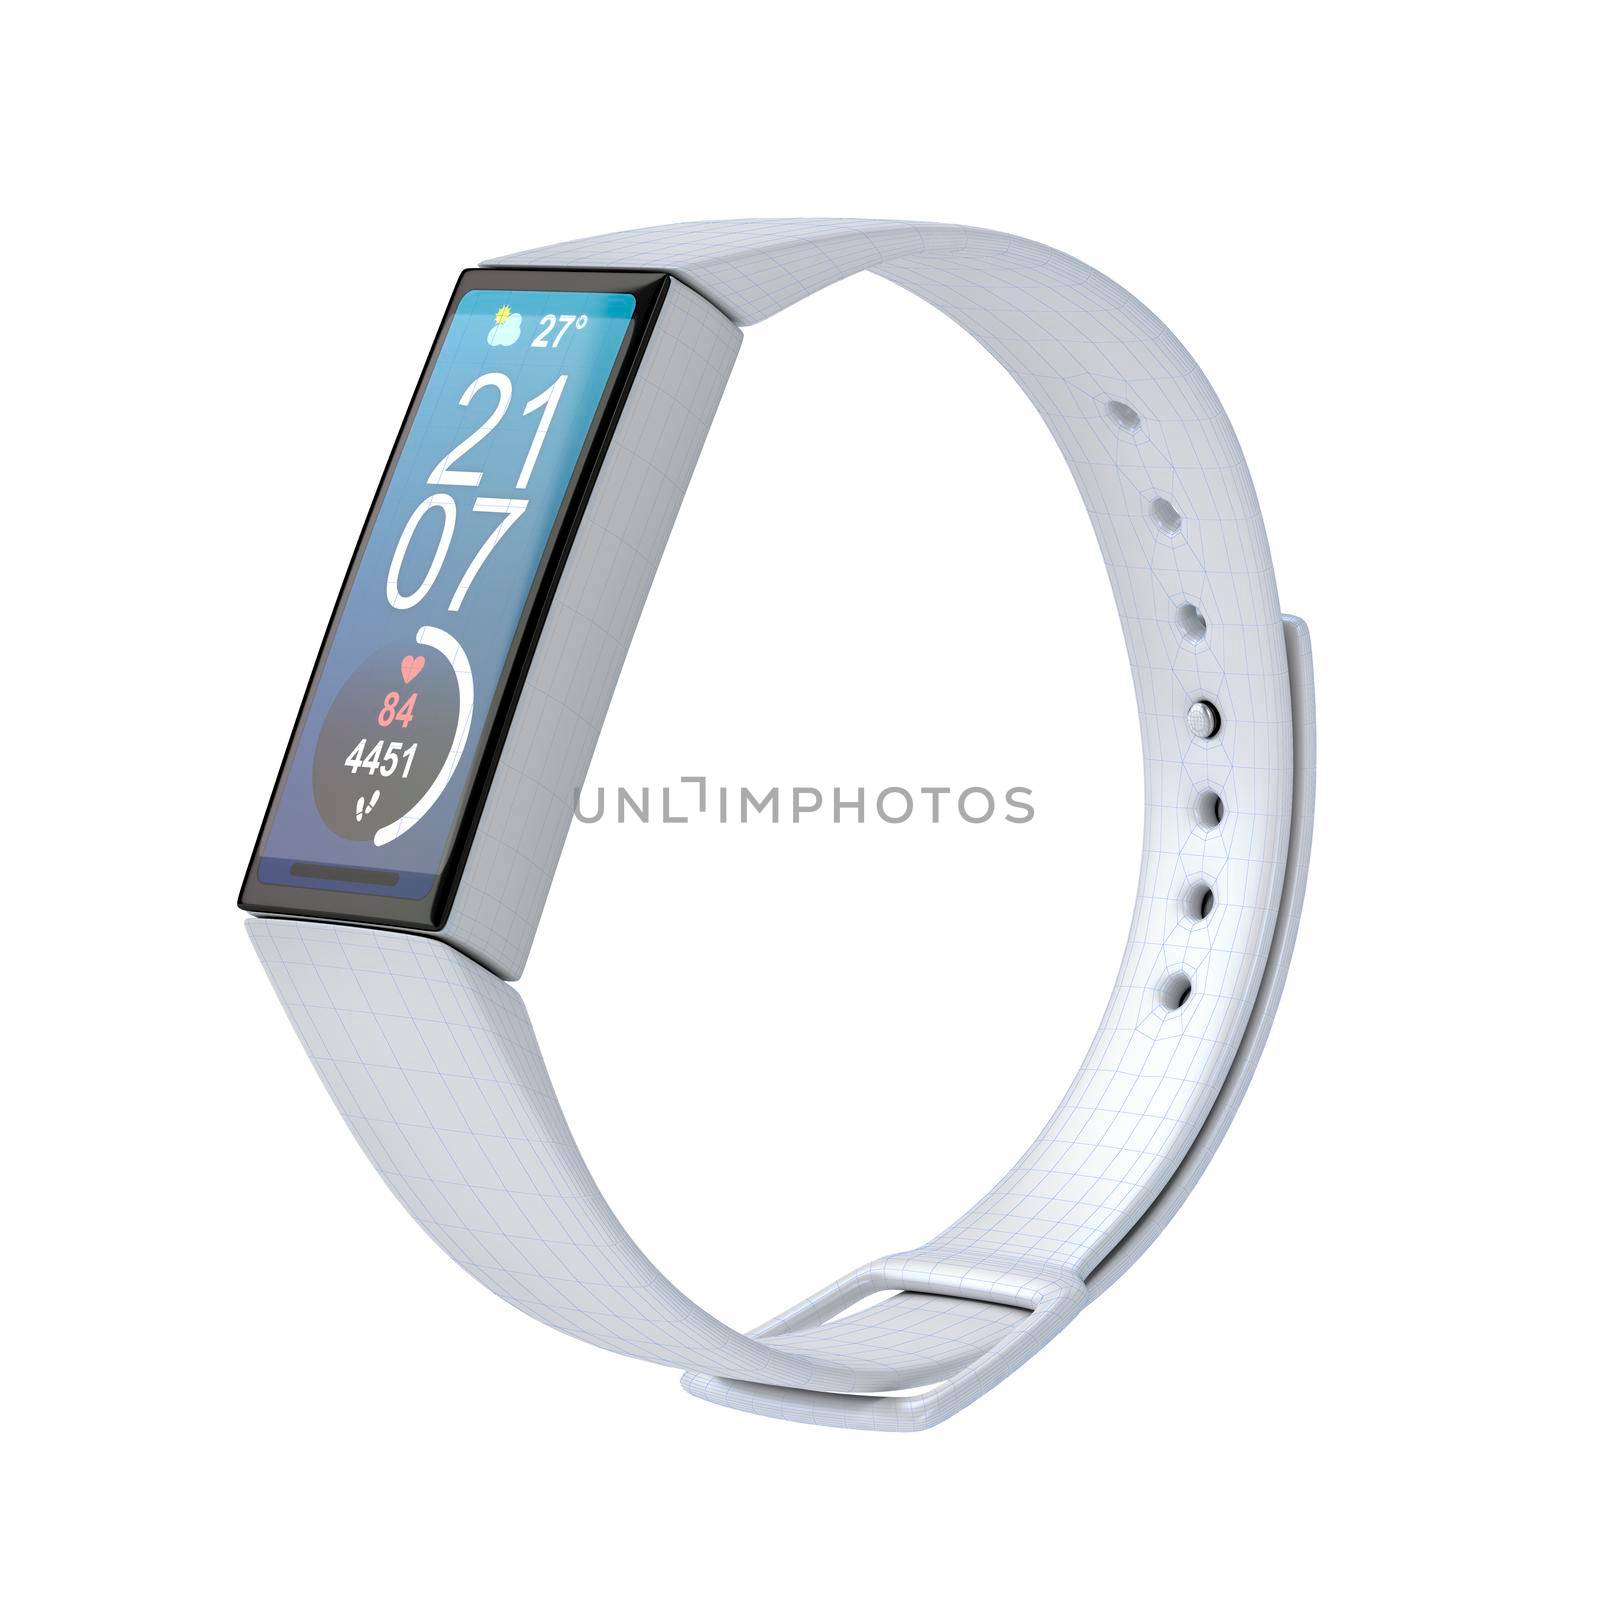 3D model of fitness tracker with visible wire-frame, isolated on white background